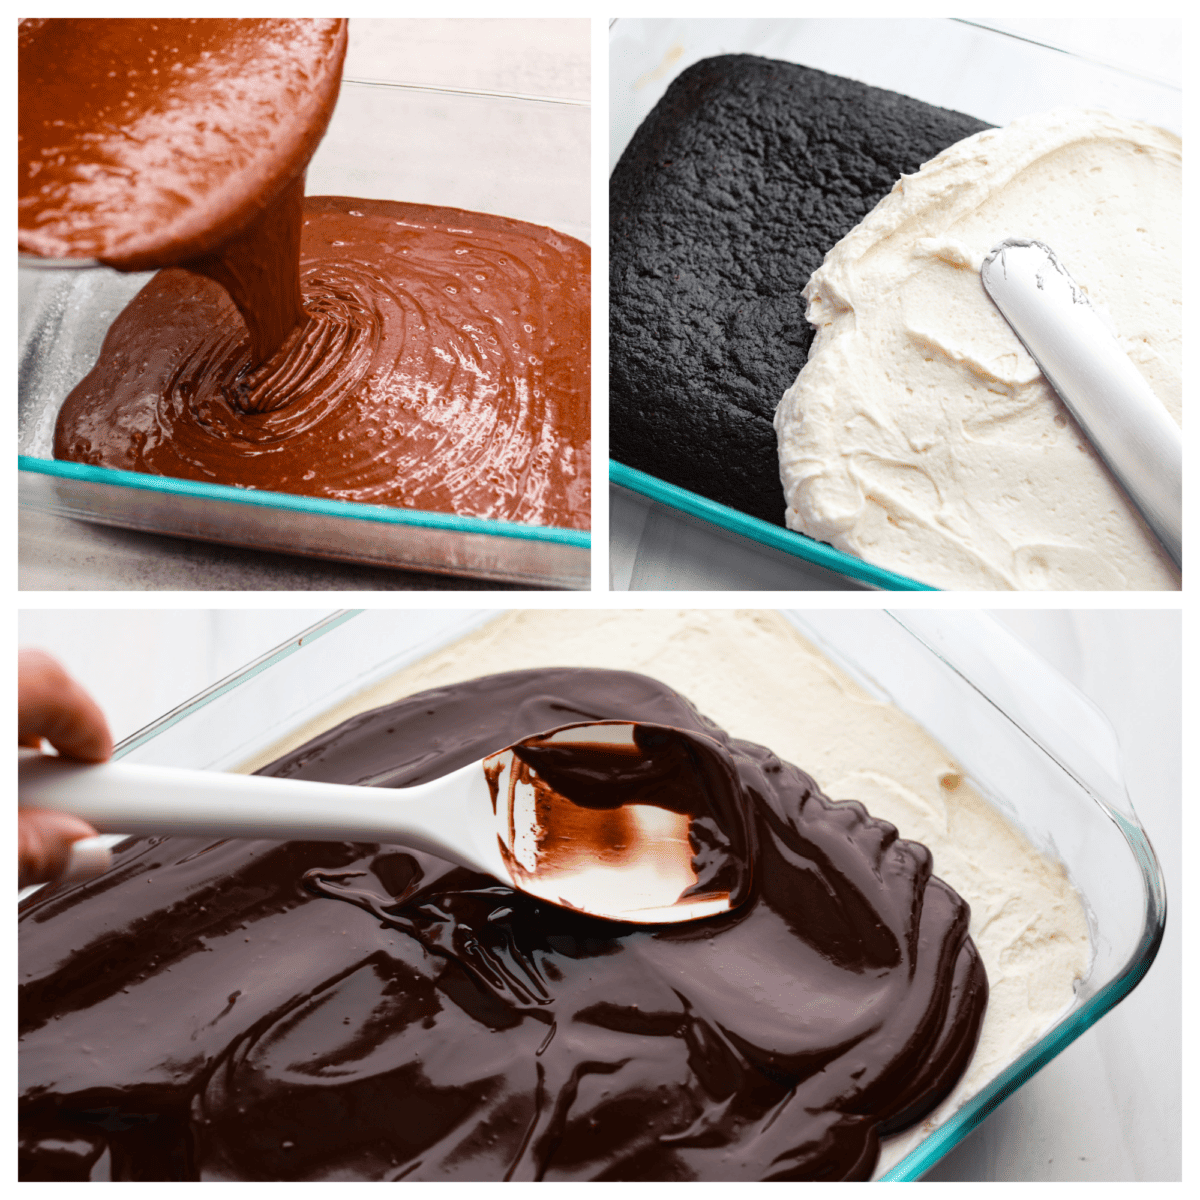 First photo of cake batter pouring into a pan. Second photo of the cake being frosting with the cream filling. Third photo of the ganache spreading on the cake.